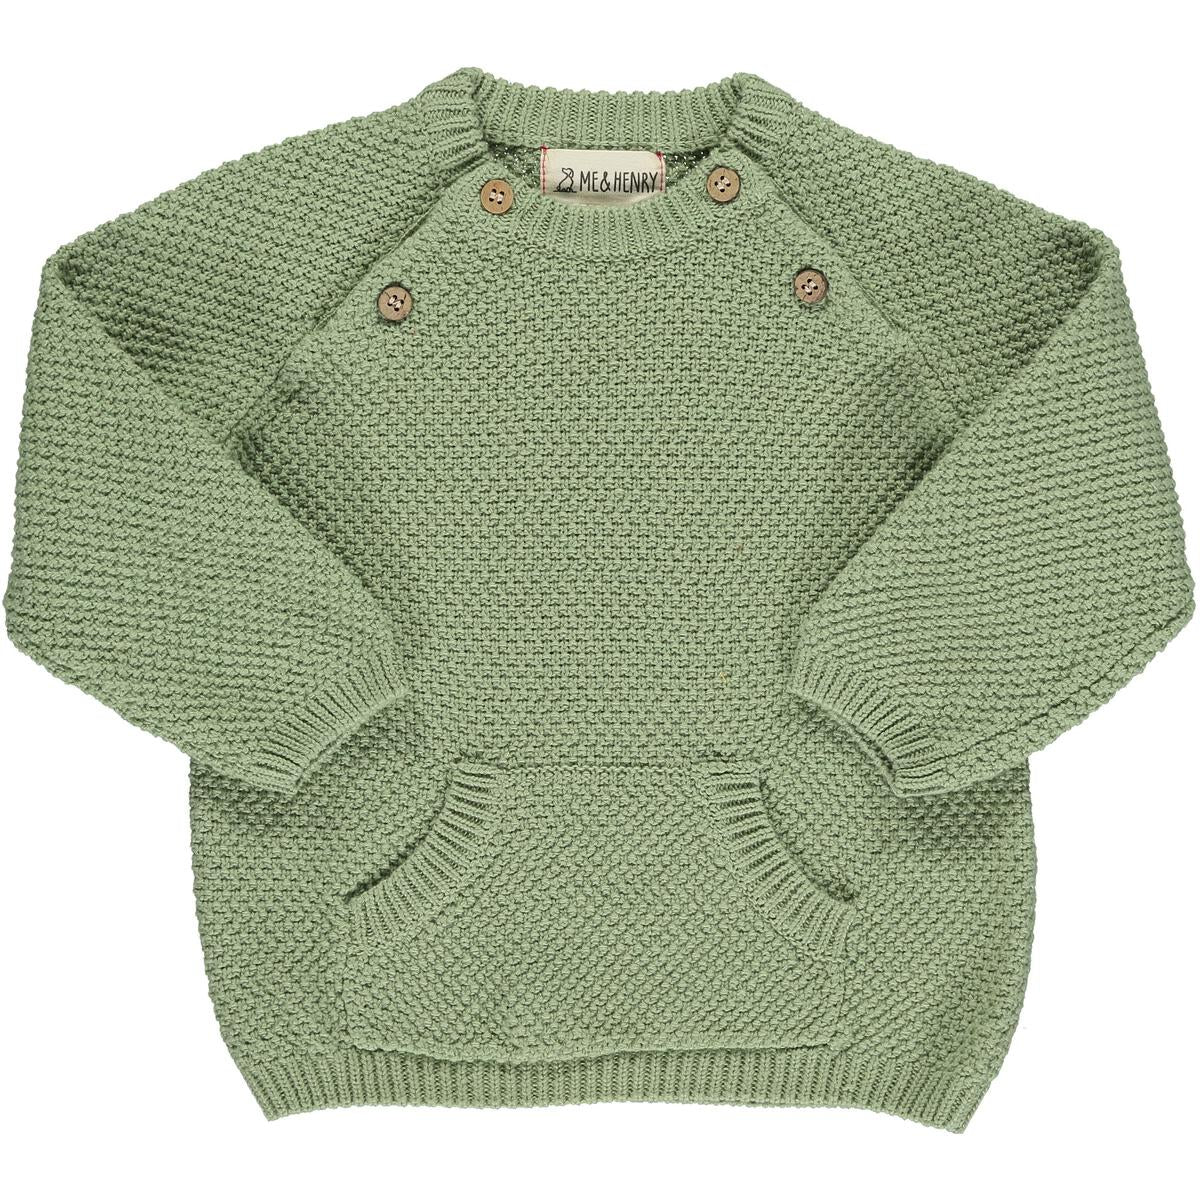 The Morrison Sweater will keep your little one warm and dapper! Made of incredibly soft 100% cotton, it looks smart with its buttons on the shoulders, and is perfect for all the budding gentlemen out there! Lookin' suave has never been so cosy!  100% Cotton. 